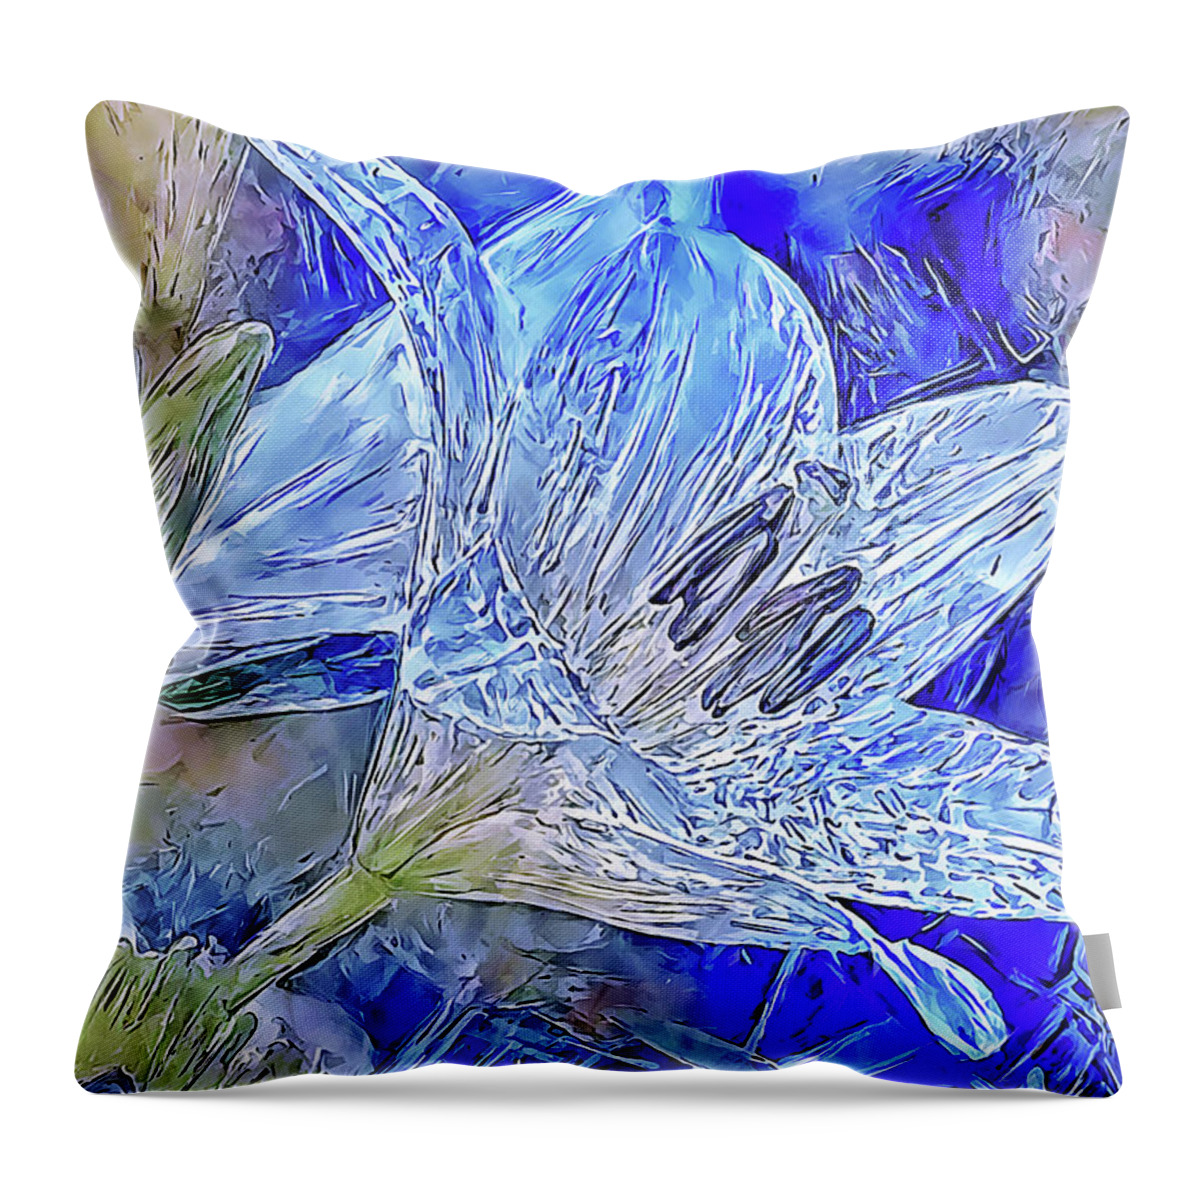 Lily Throw Pillow featuring the digital art Ice Lily by Alex Mir